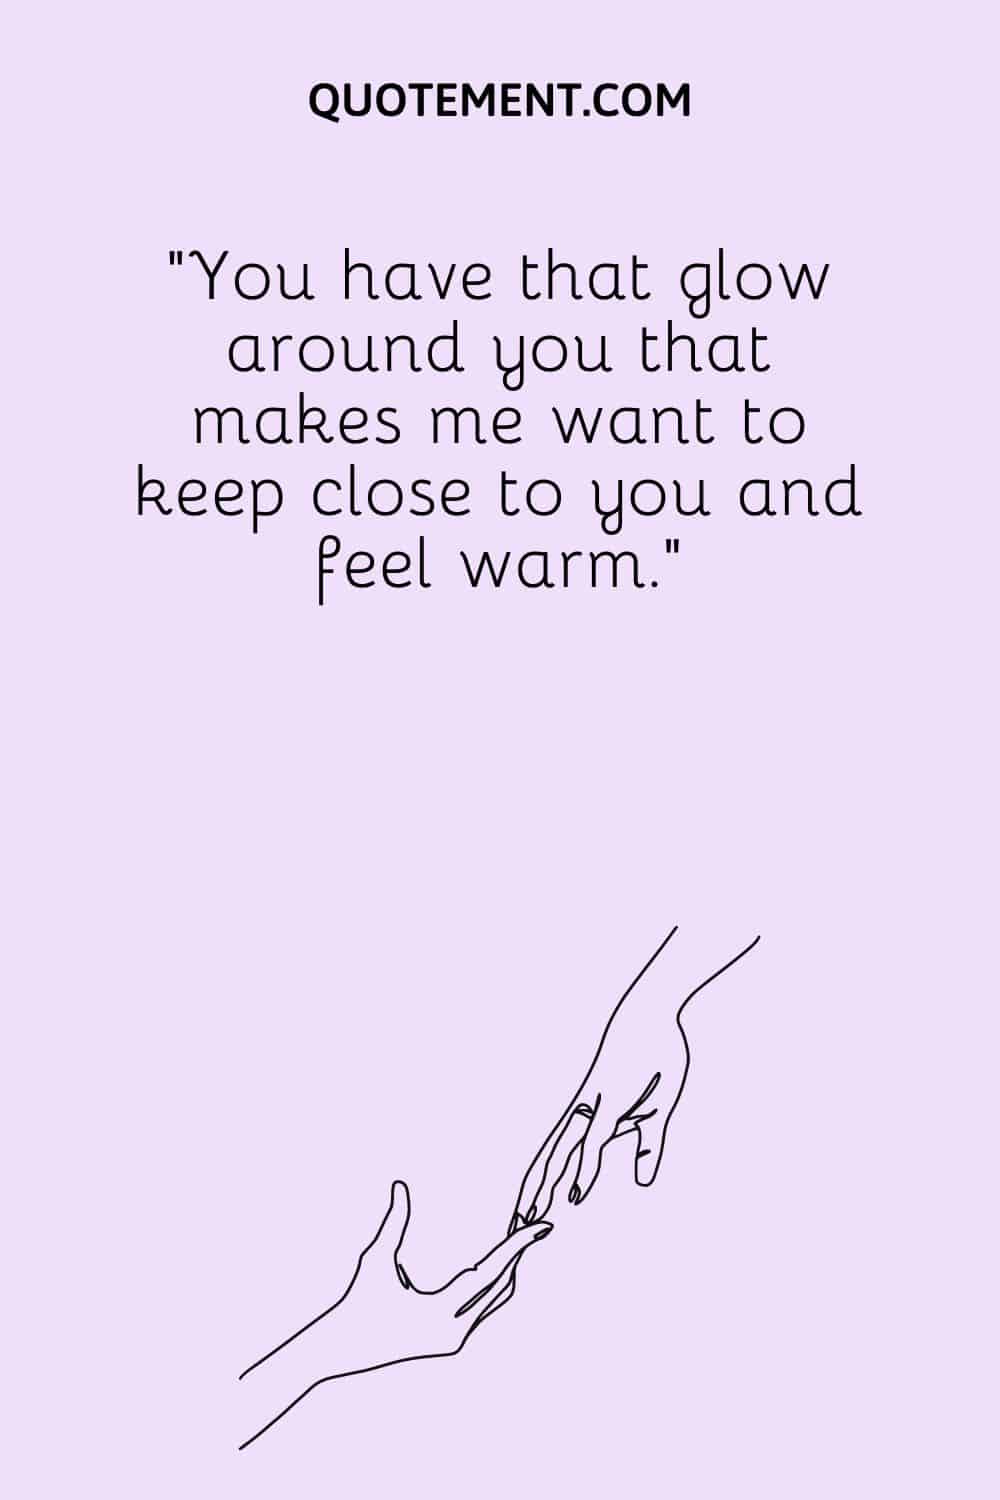 You have that glow around you that makes me want to keep close to you and feel warm